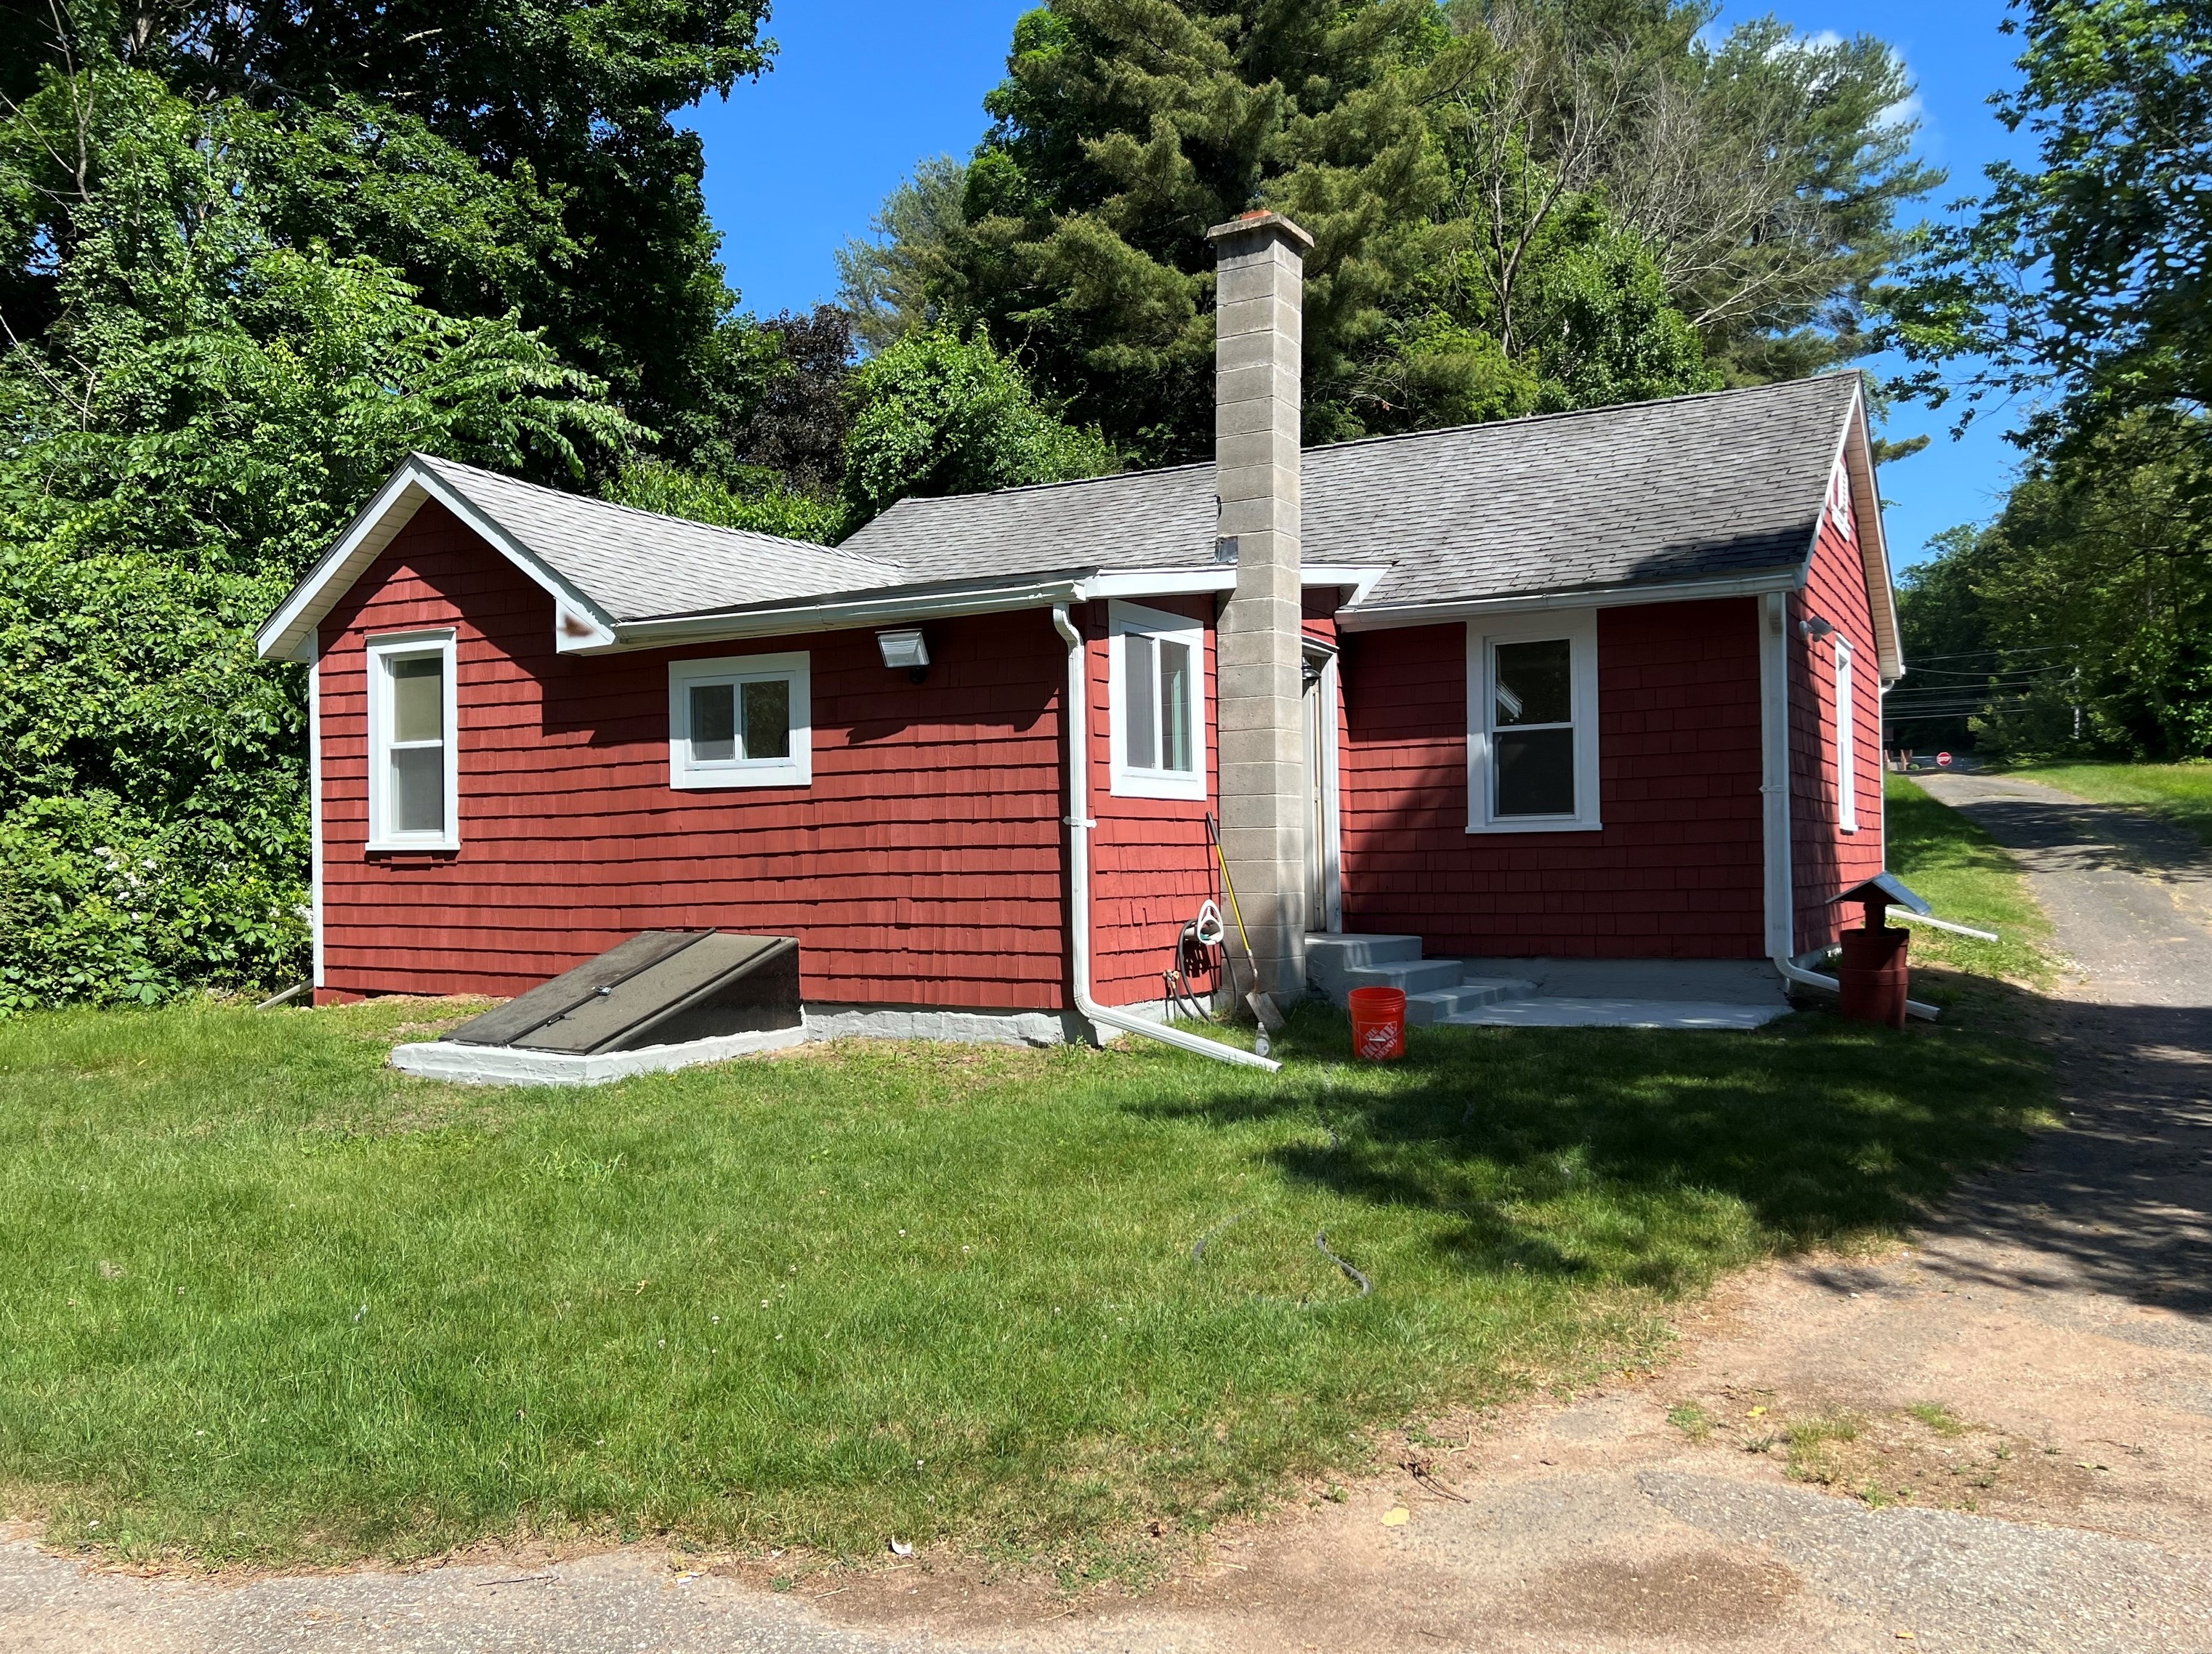 2 Old Willimantic Rd, North Windham, CT 06235